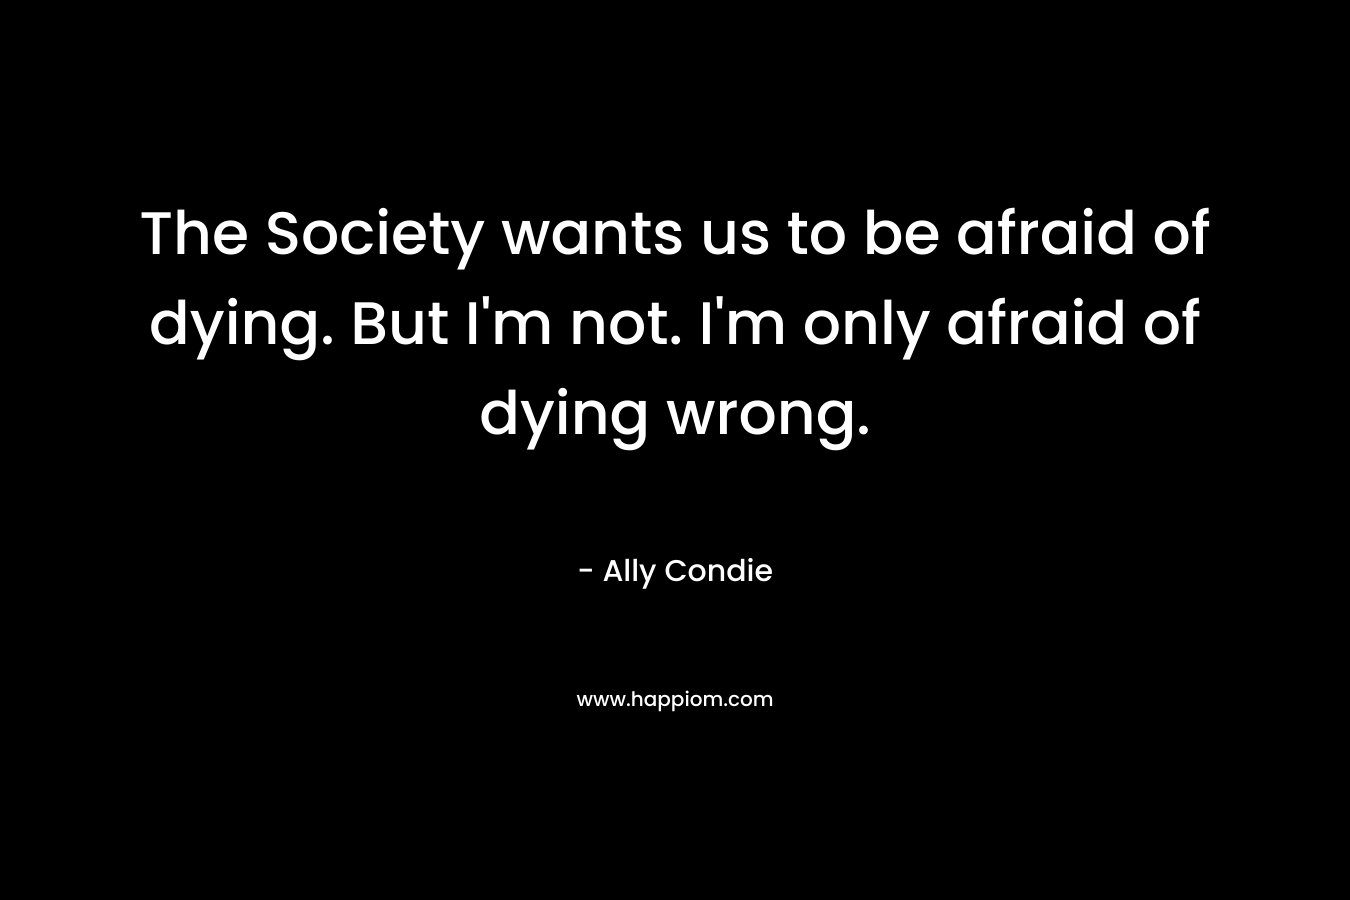 The Society wants us to be afraid of dying. But I’m not. I’m only afraid of dying wrong. – Ally Condie